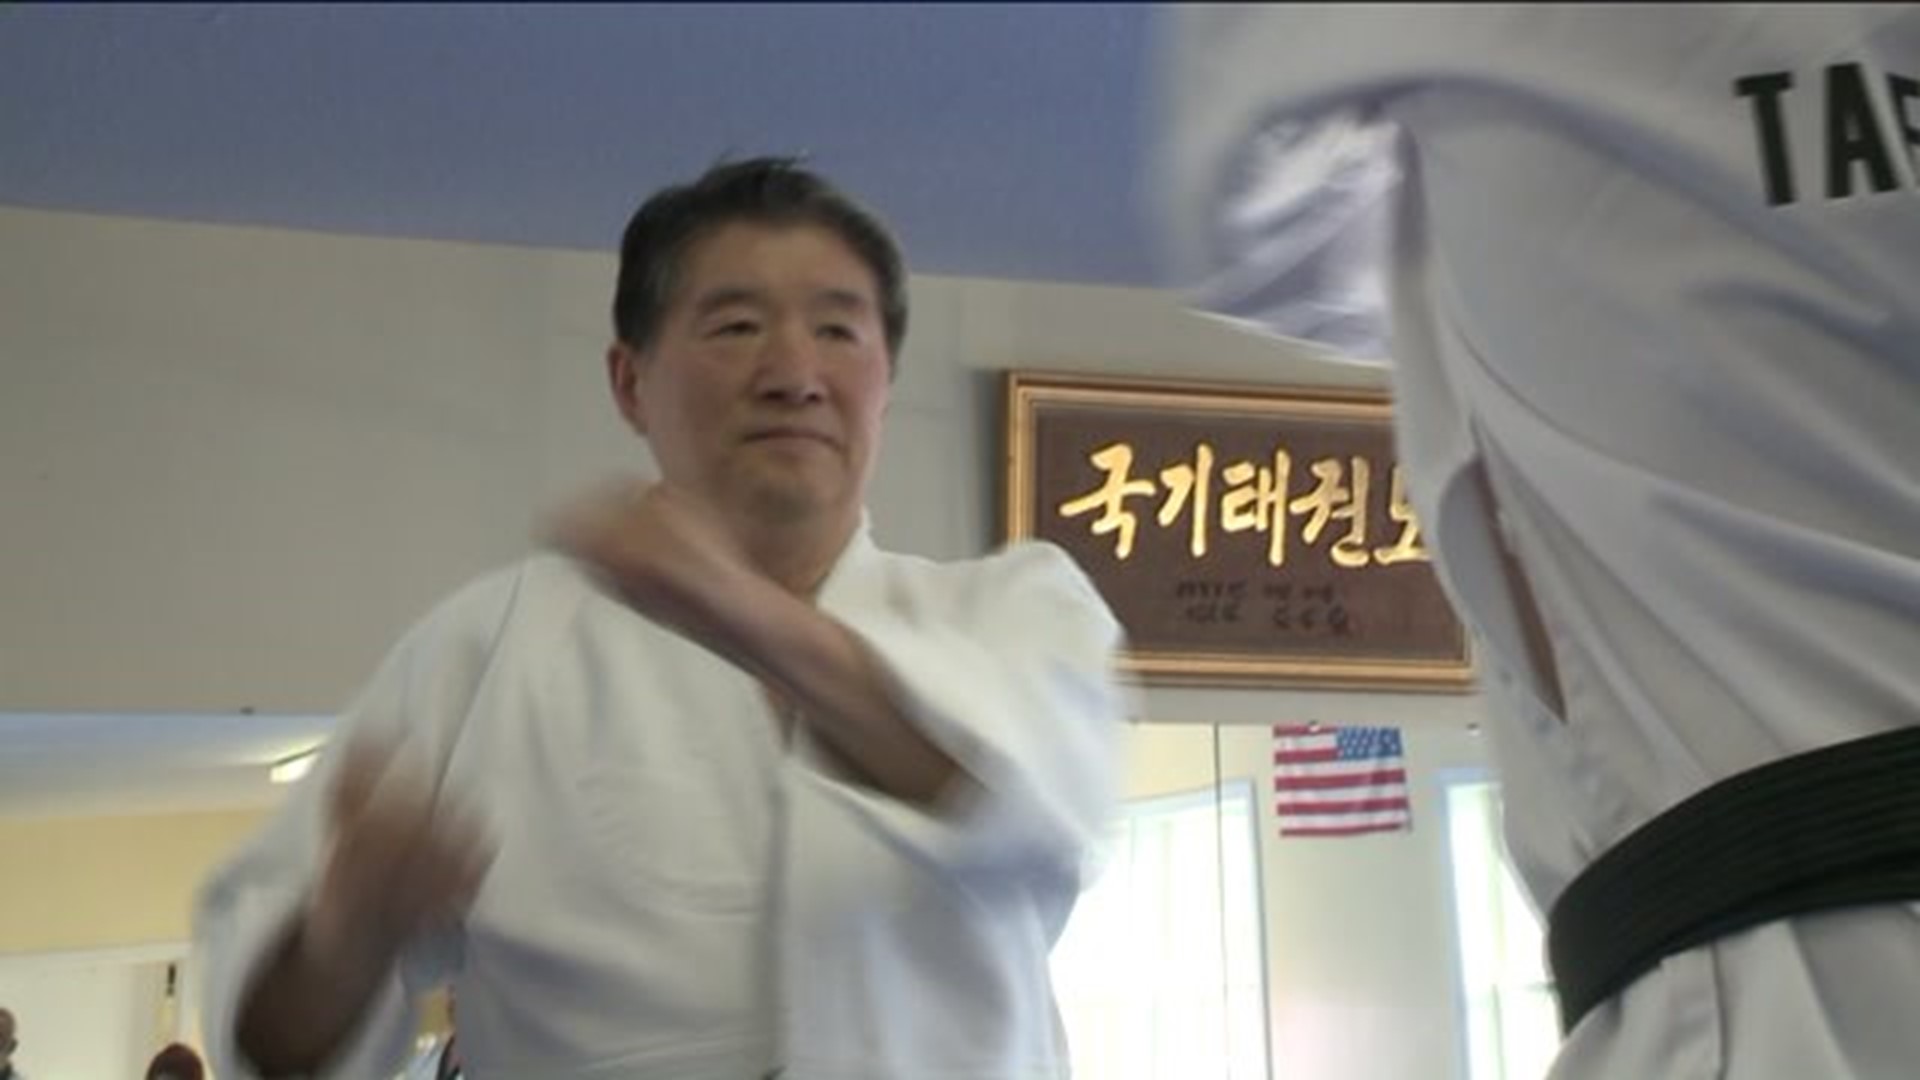 Celebrating 40 years as a martial arts teacher